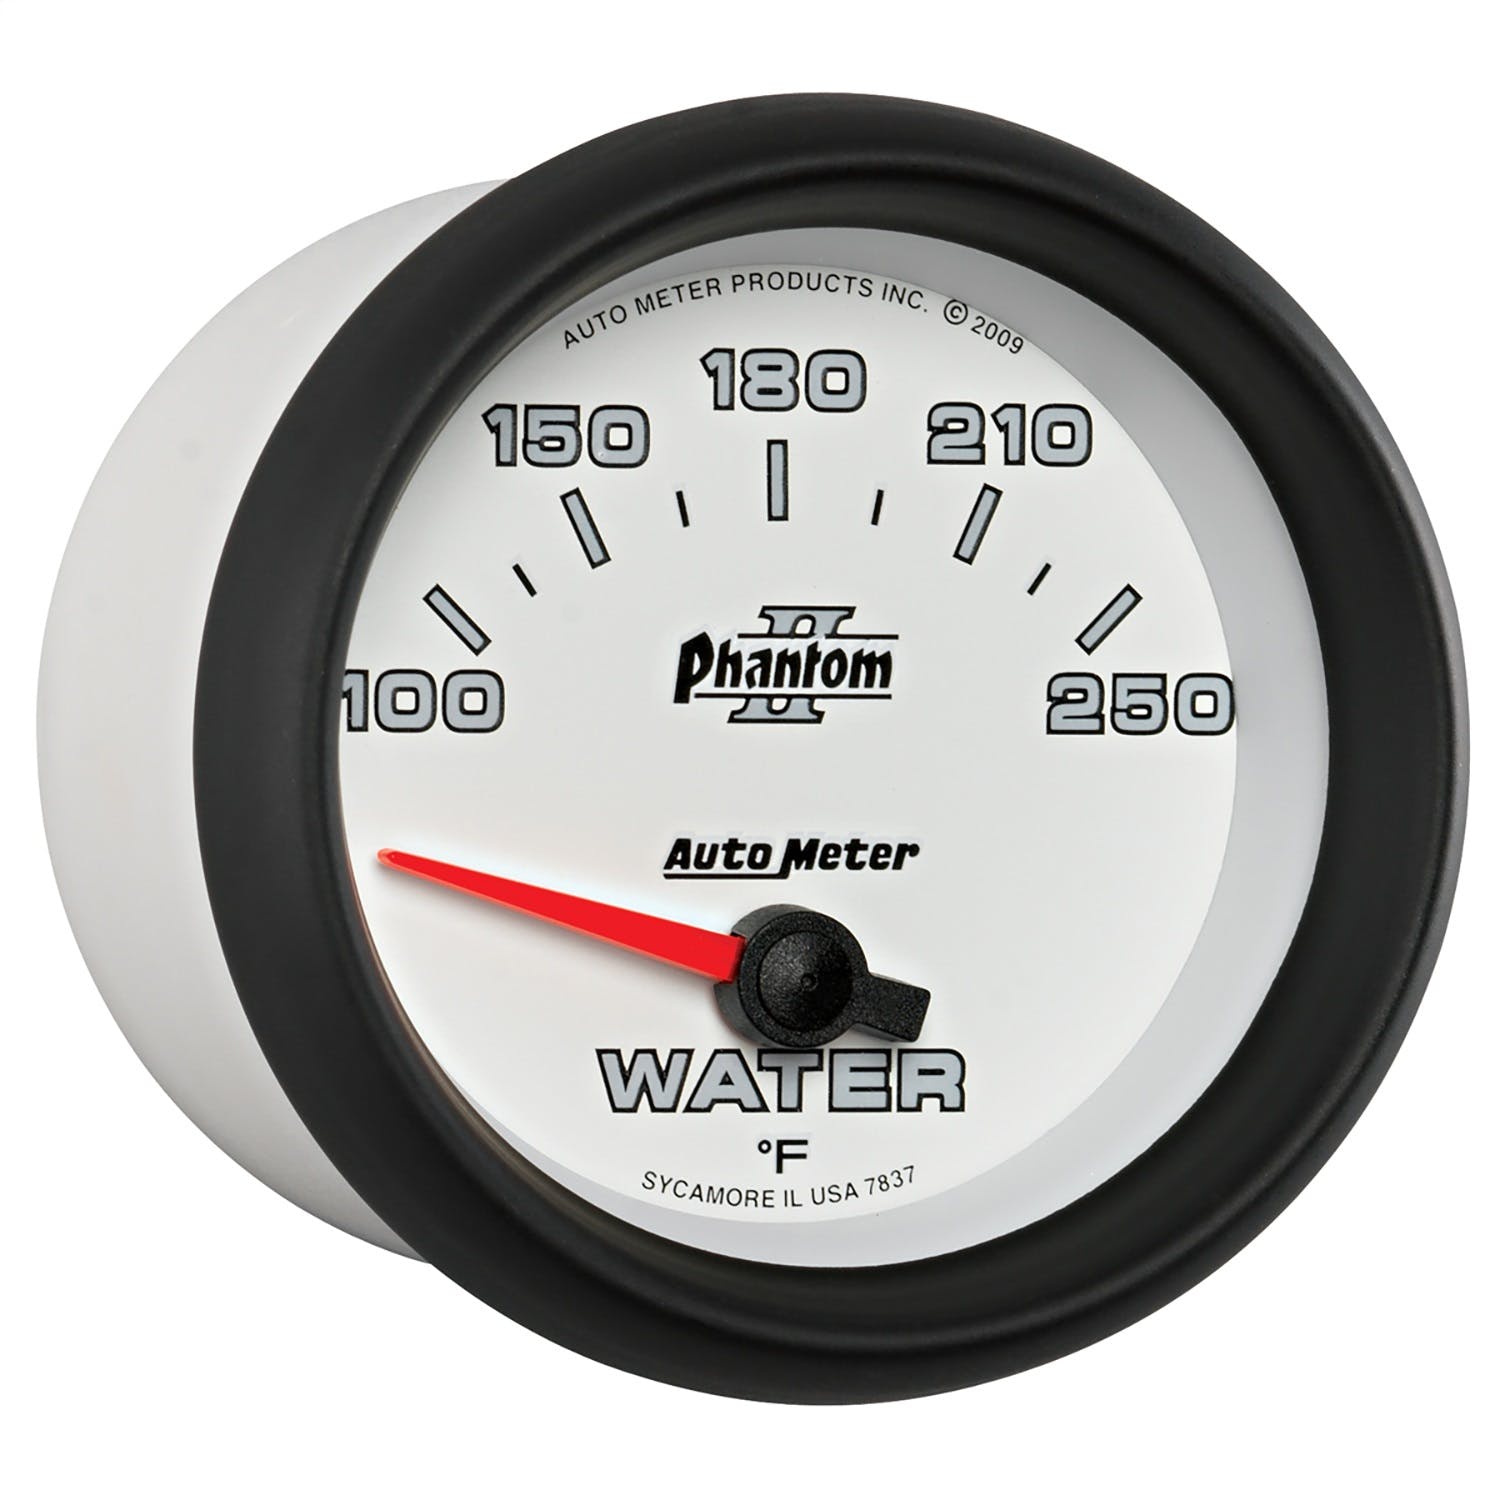 AutoMeter Products 7837 Gauge; Water Temp; 2 5/8in.; 100-250° F; Electric; Phantom II